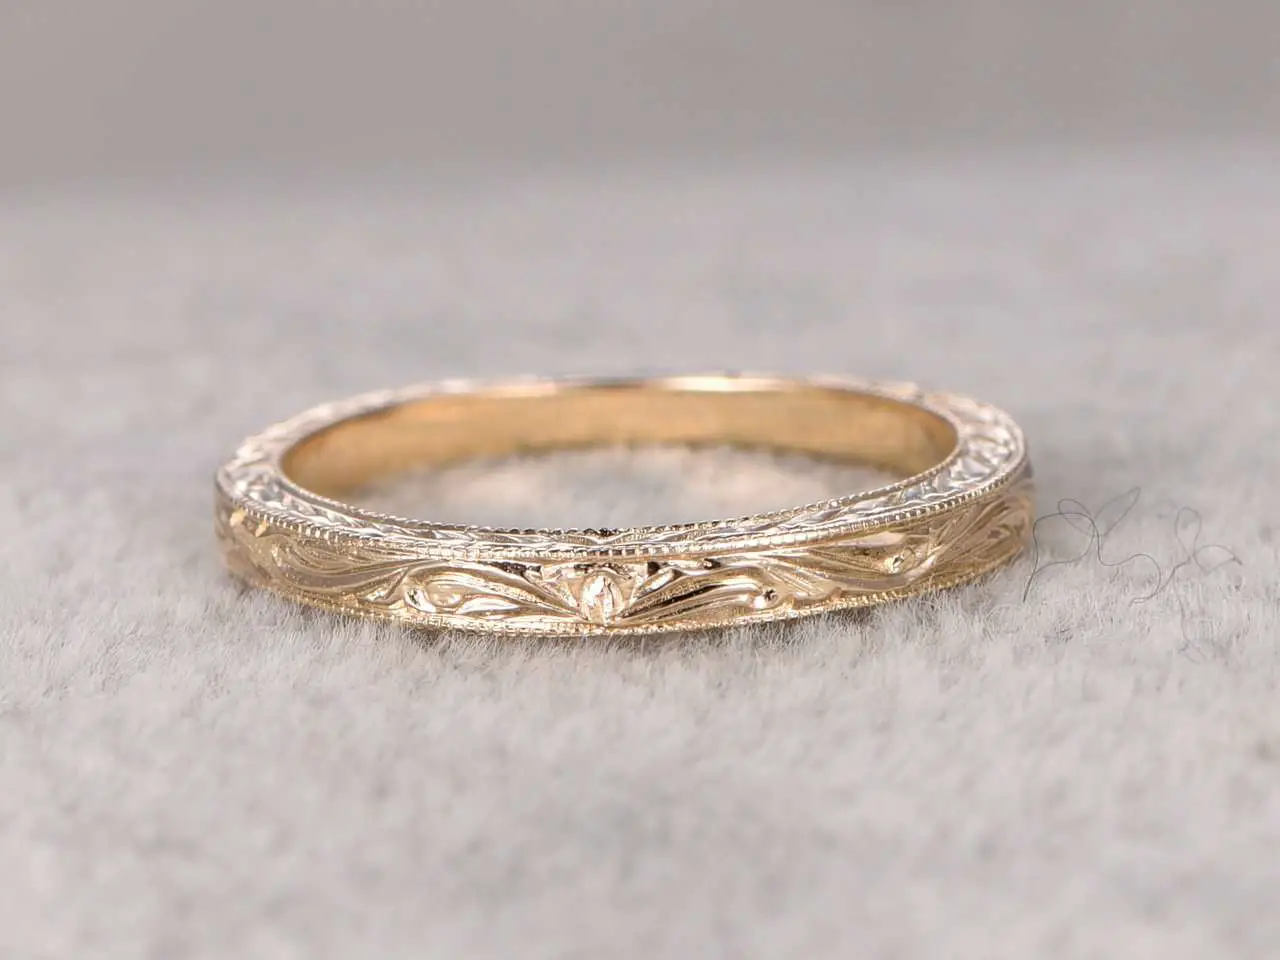 Antique Wedding Band Solid 14k Yellow Gold Filigree Flower ...